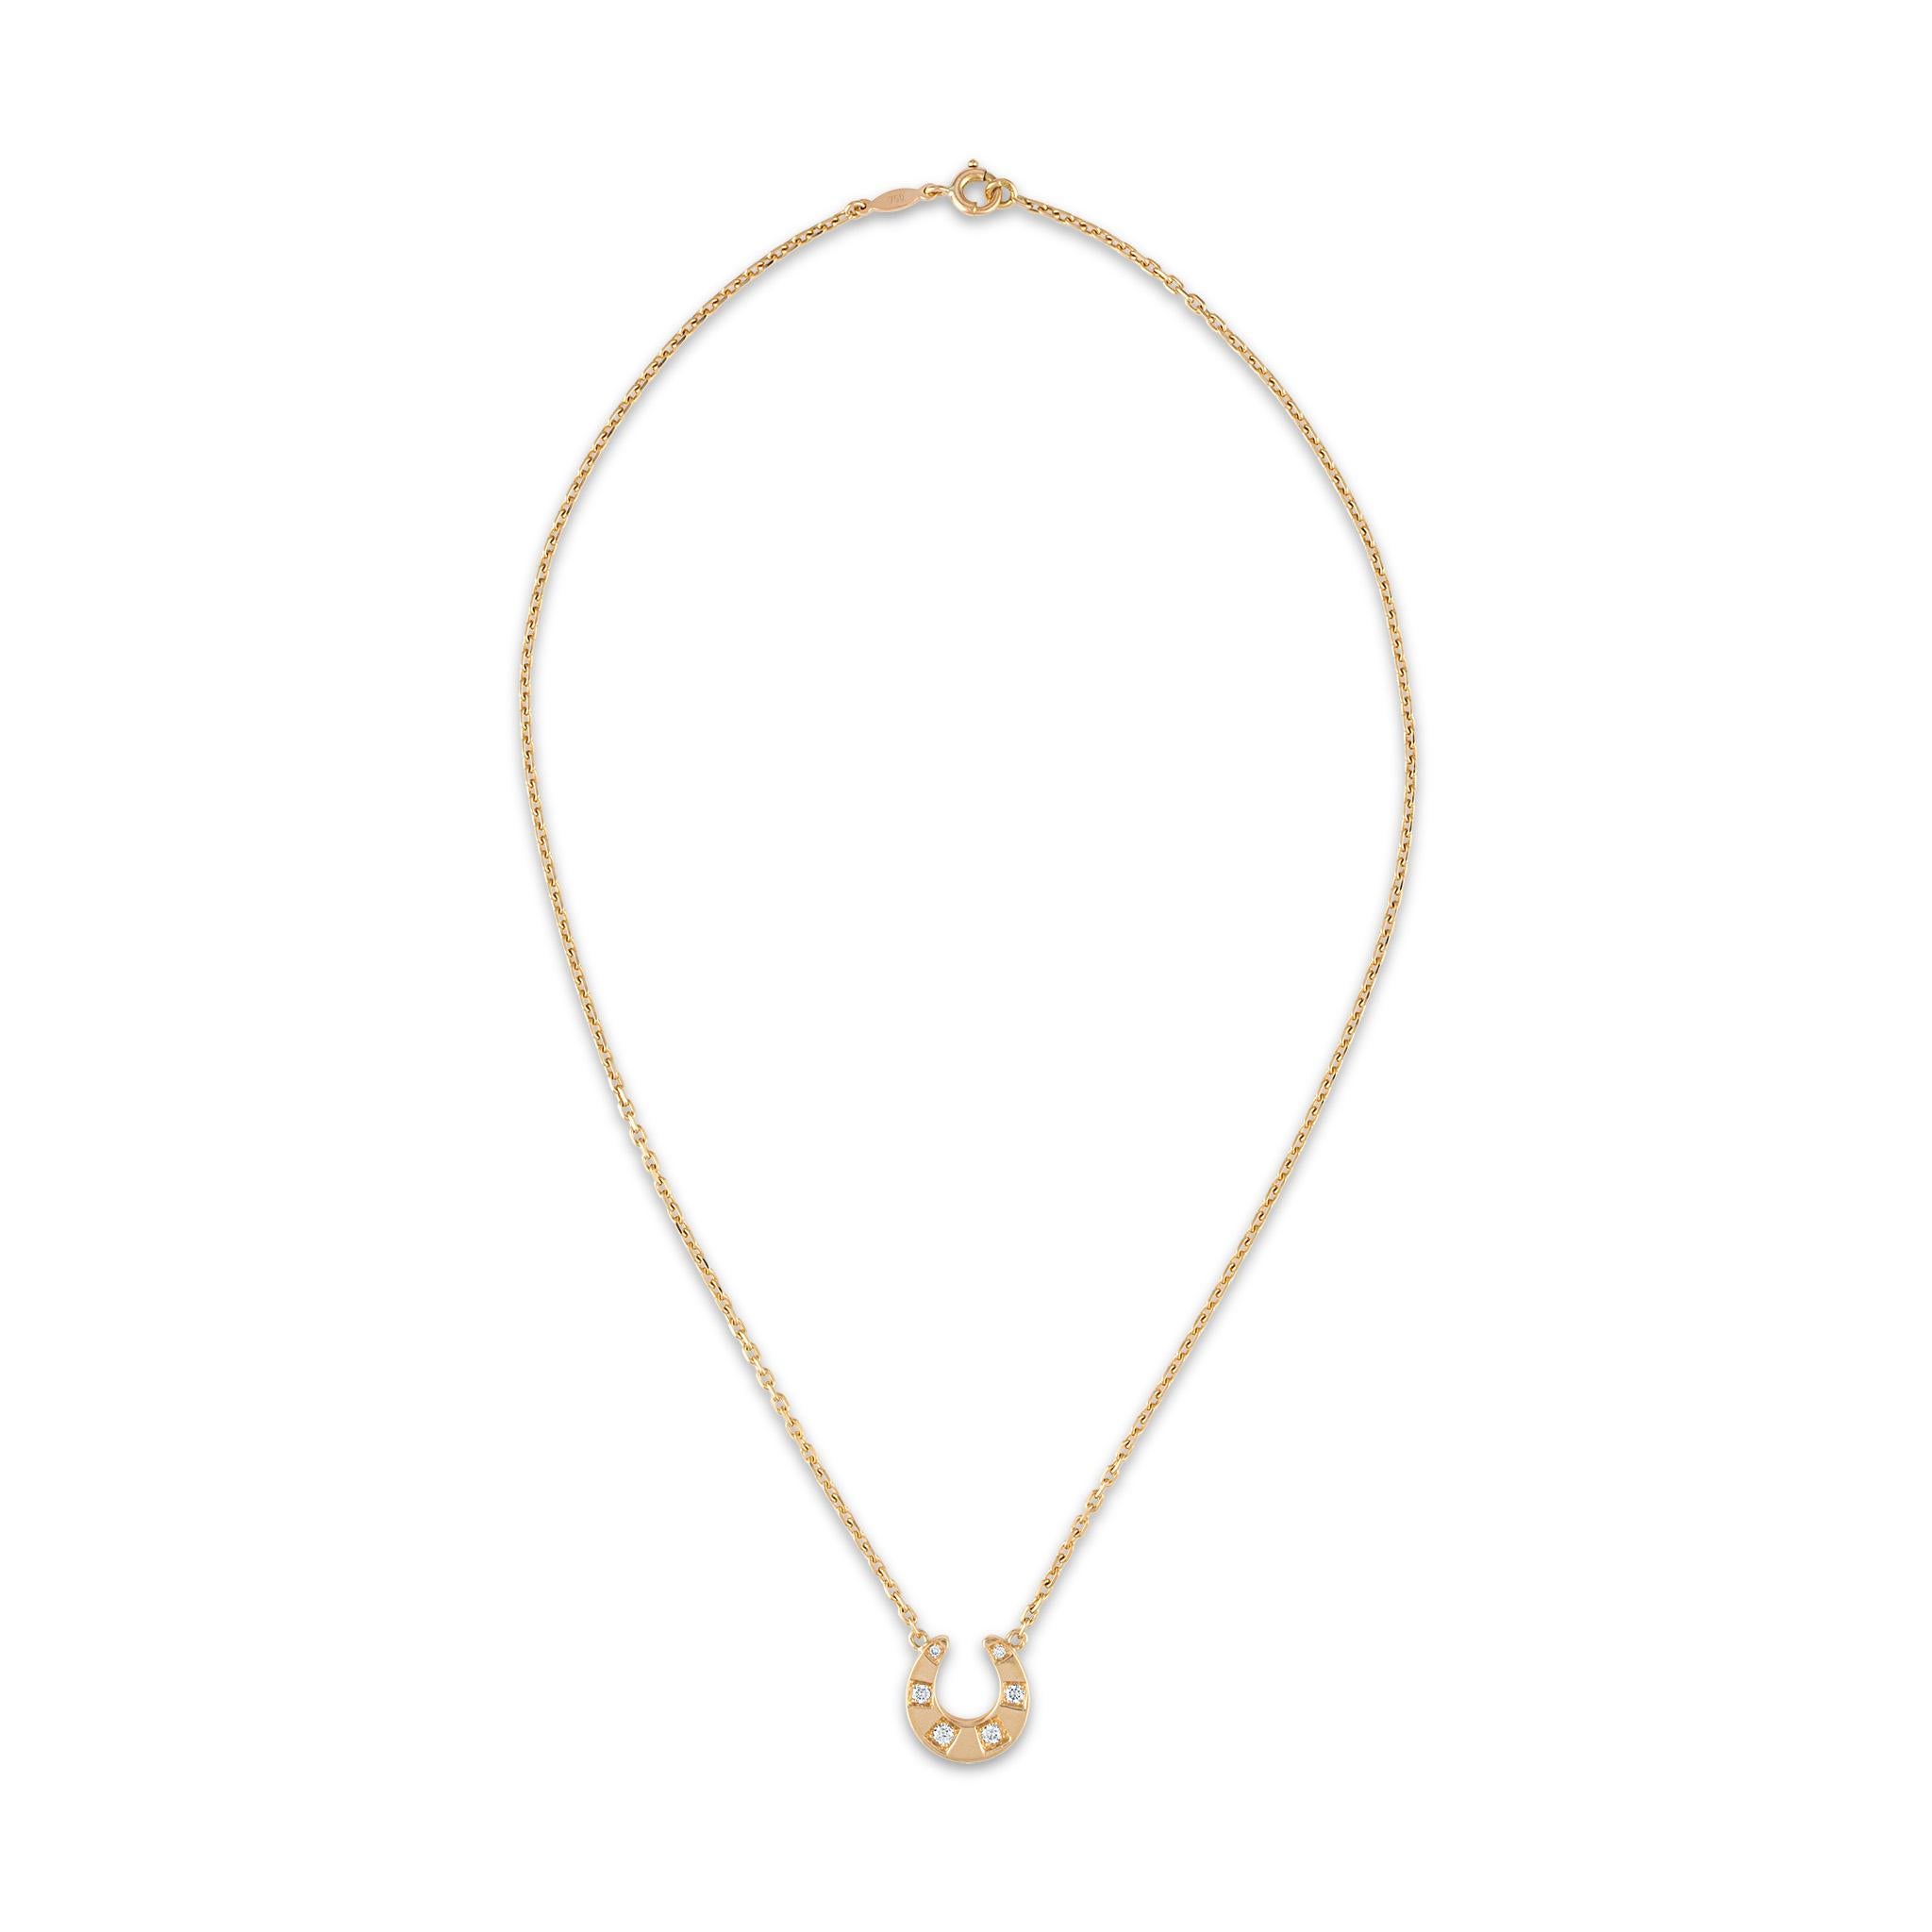 METAL TYPE: 18K Yellow Gold
TOTAL WEIGHT: 8g
STONE WEIGHT: 0.25ct twd
NECKLACE LENGTH: 15